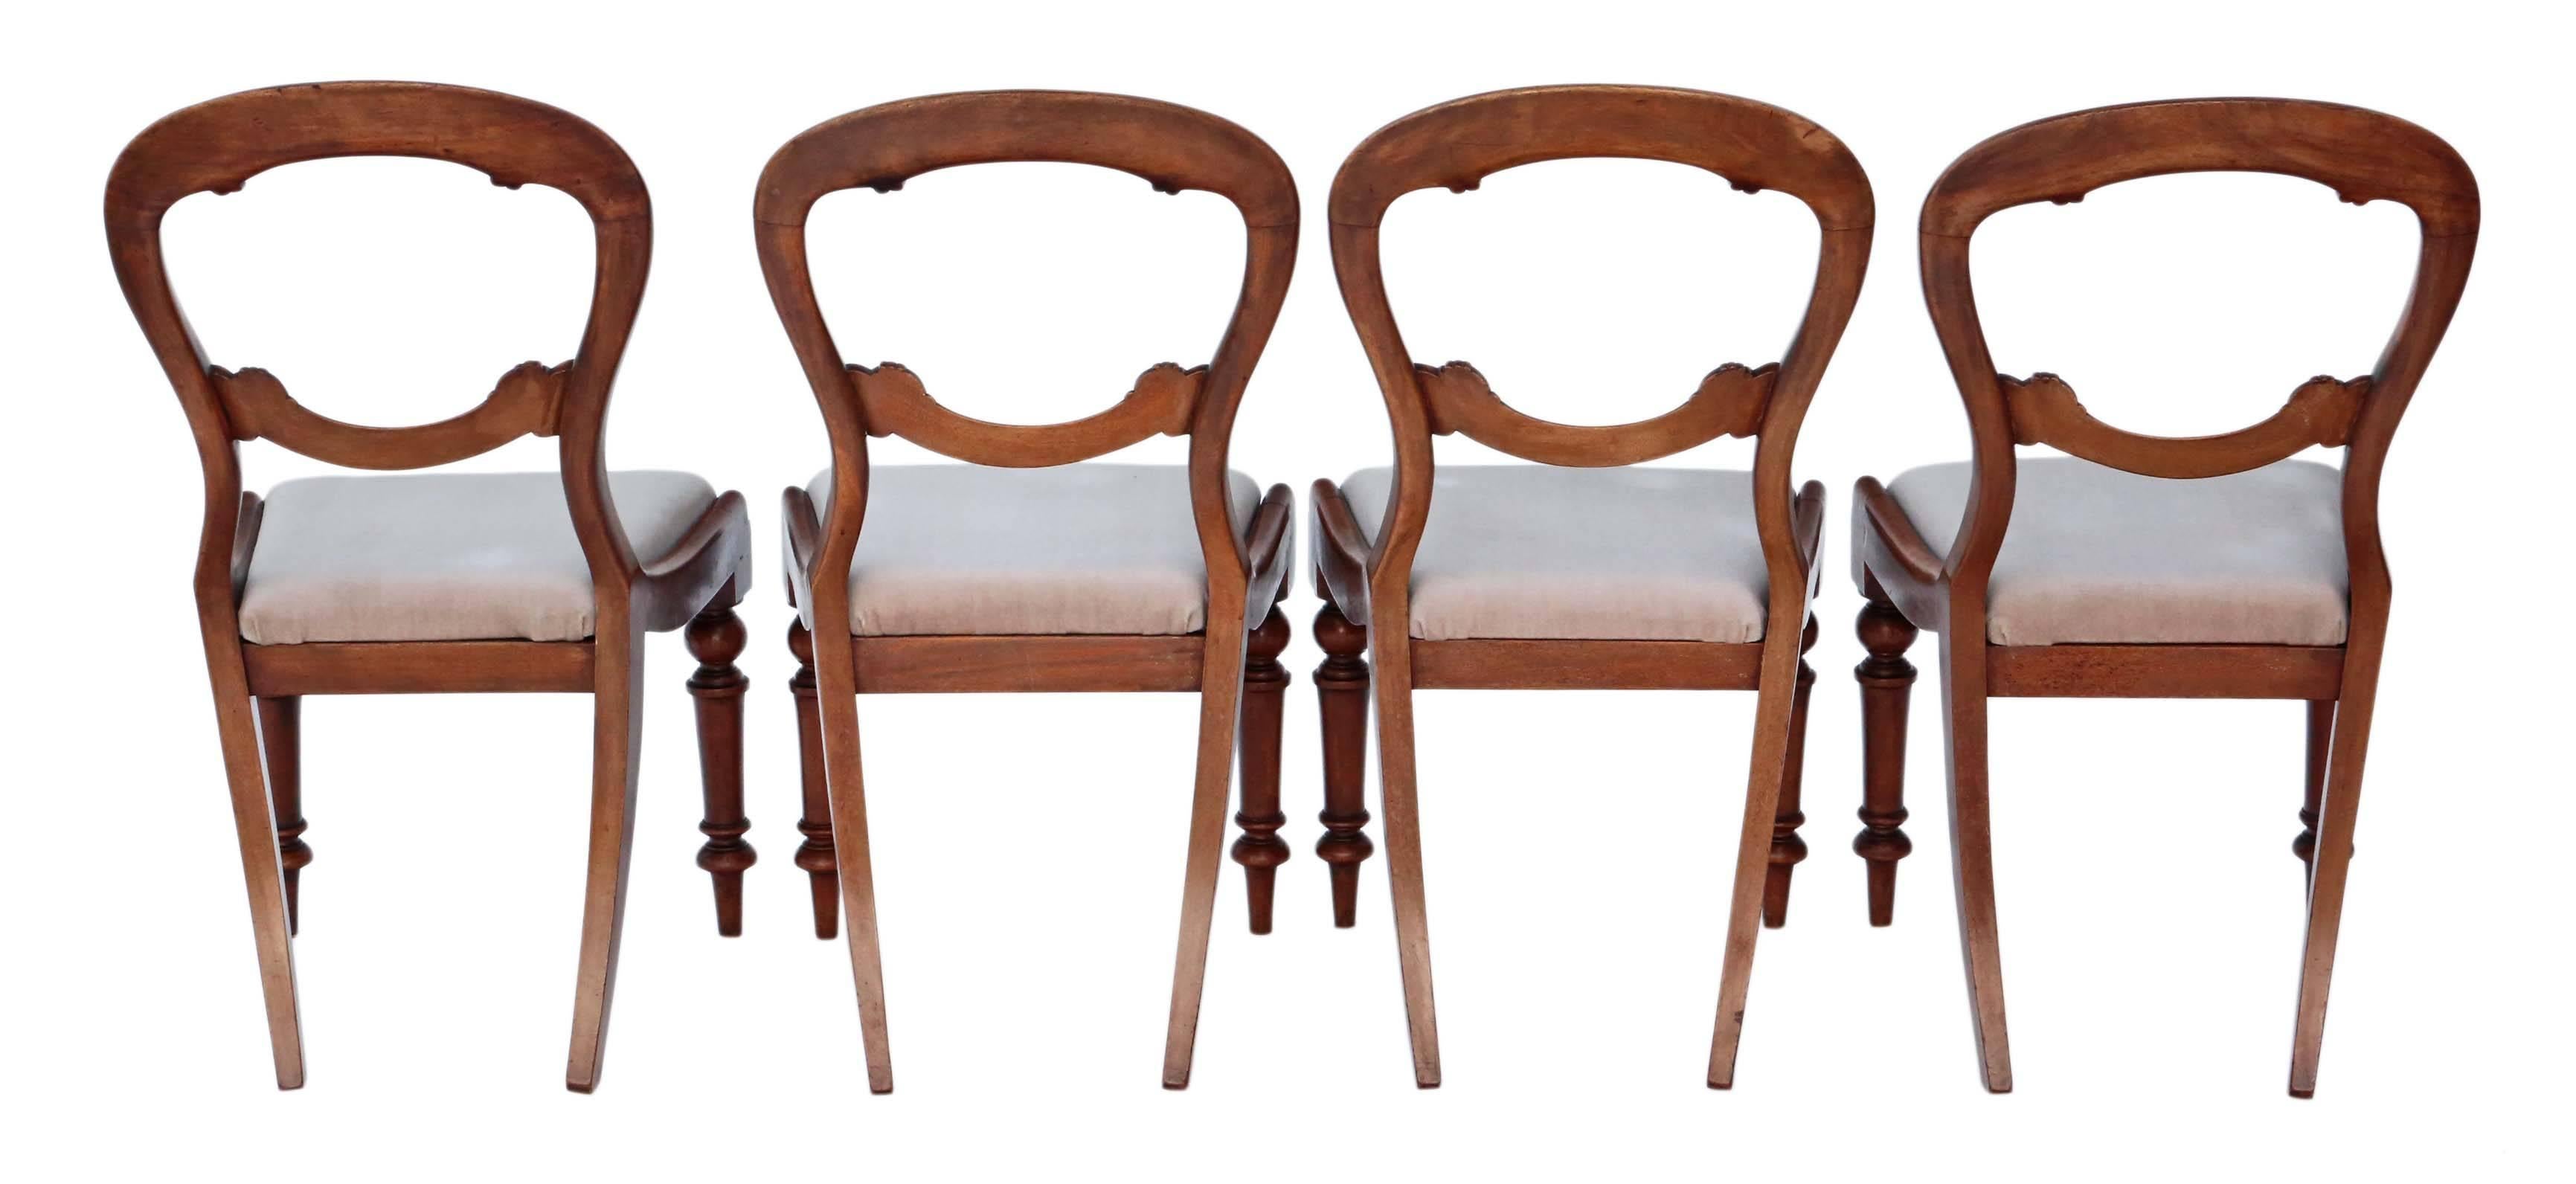 Antique quality set of four Victorian, circa 1850 mahogany balloon back dining chairs.

Solid, no loose joints and no woodworm. Full of age, character and charm. Very decorative chairs.

Recent grey/mushroom velour upholstery with no wear or